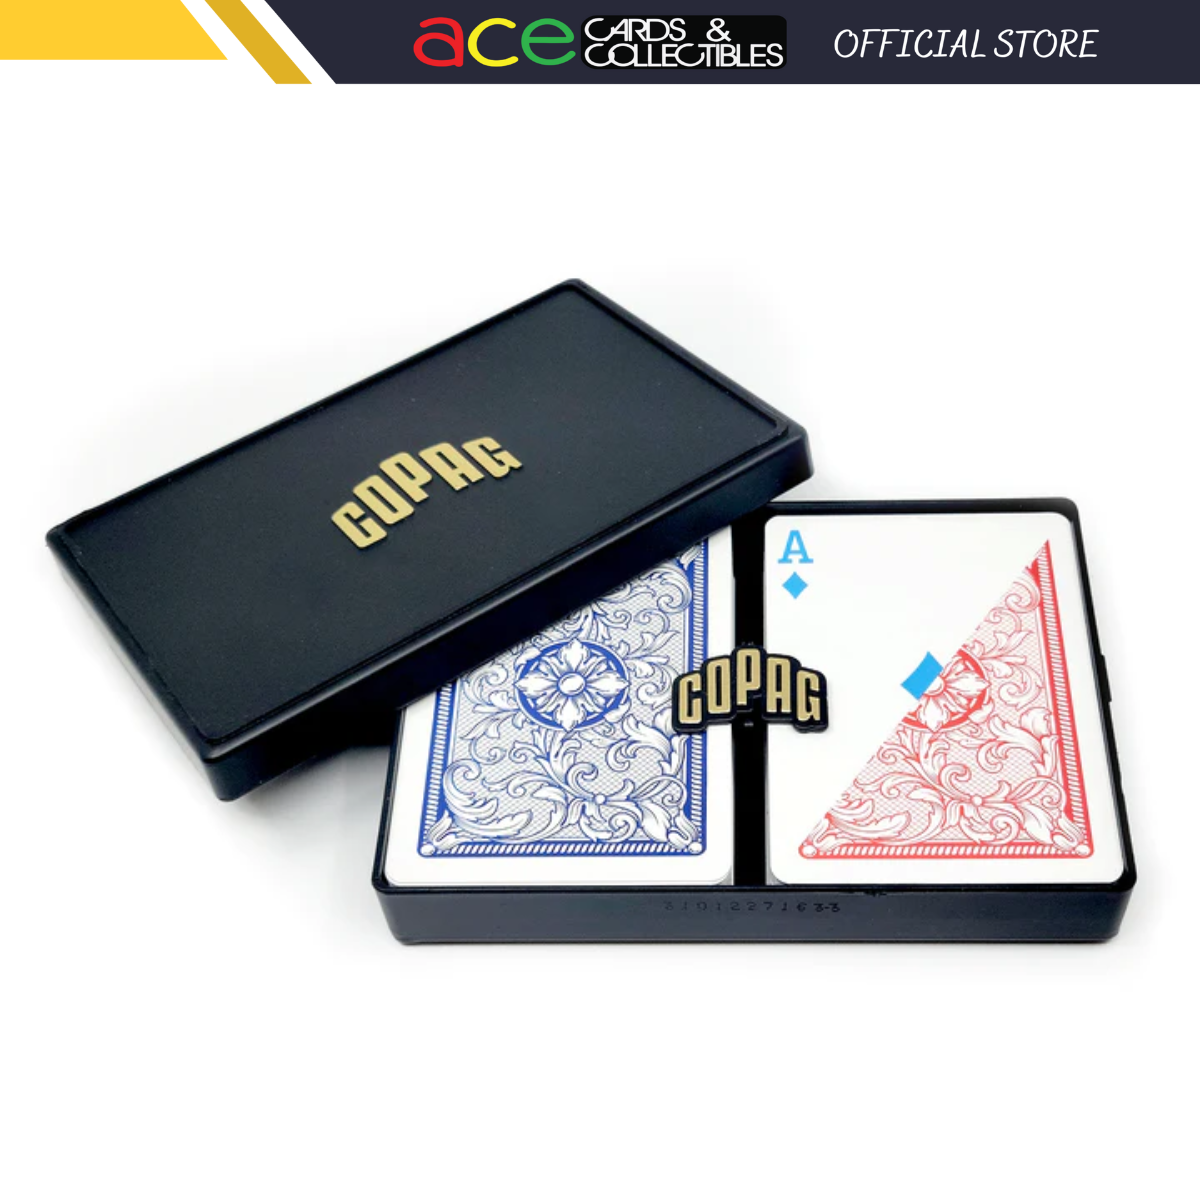 Copag Legacy 100% Plastic Playing Cards Poker Size Regular Index Double Deck Set-Red/Blue-Copag-Ace Cards &amp; Collectibles